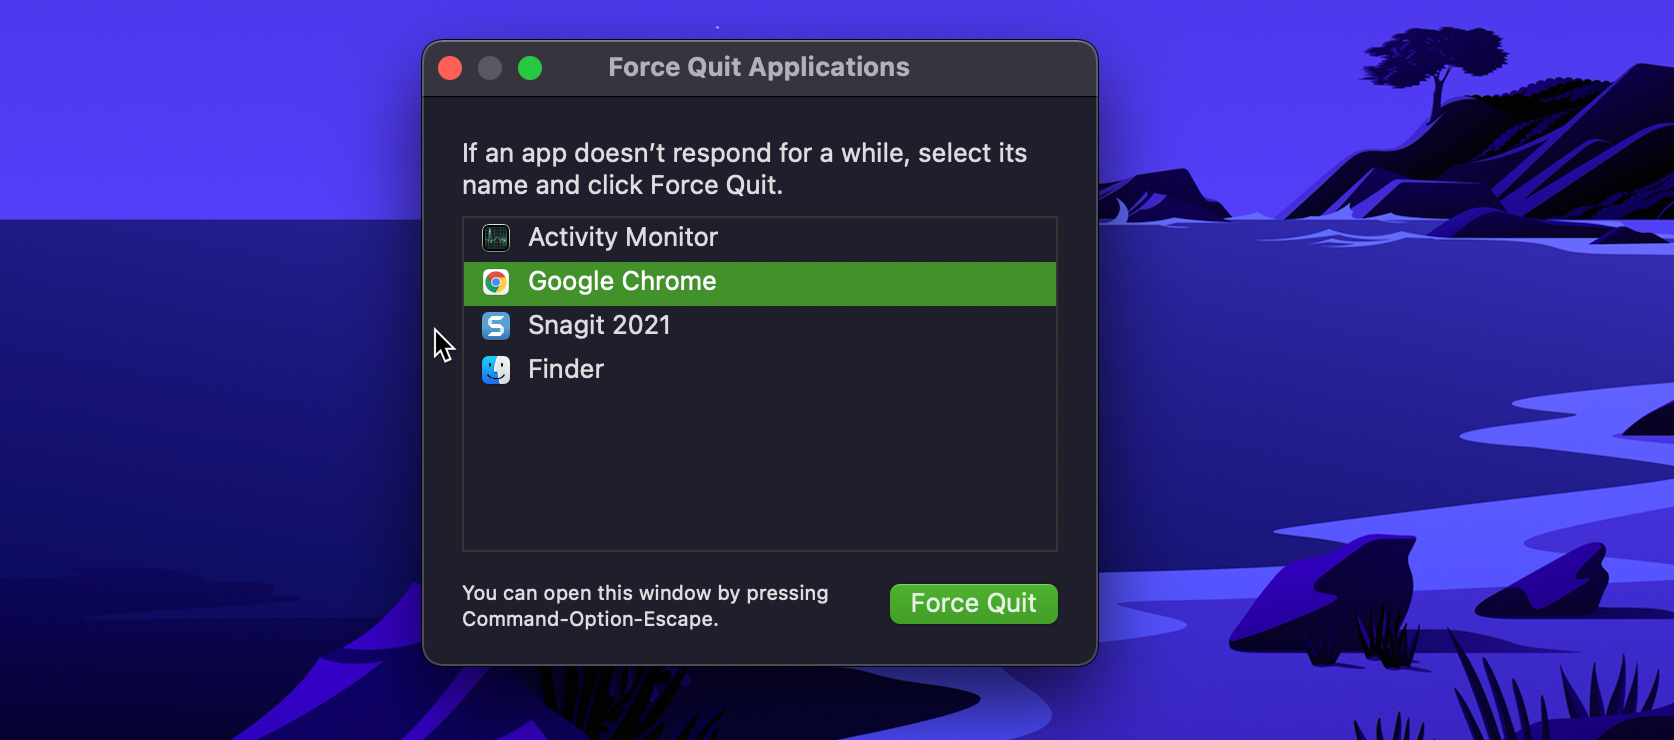 Force Quit Applications window in macOS